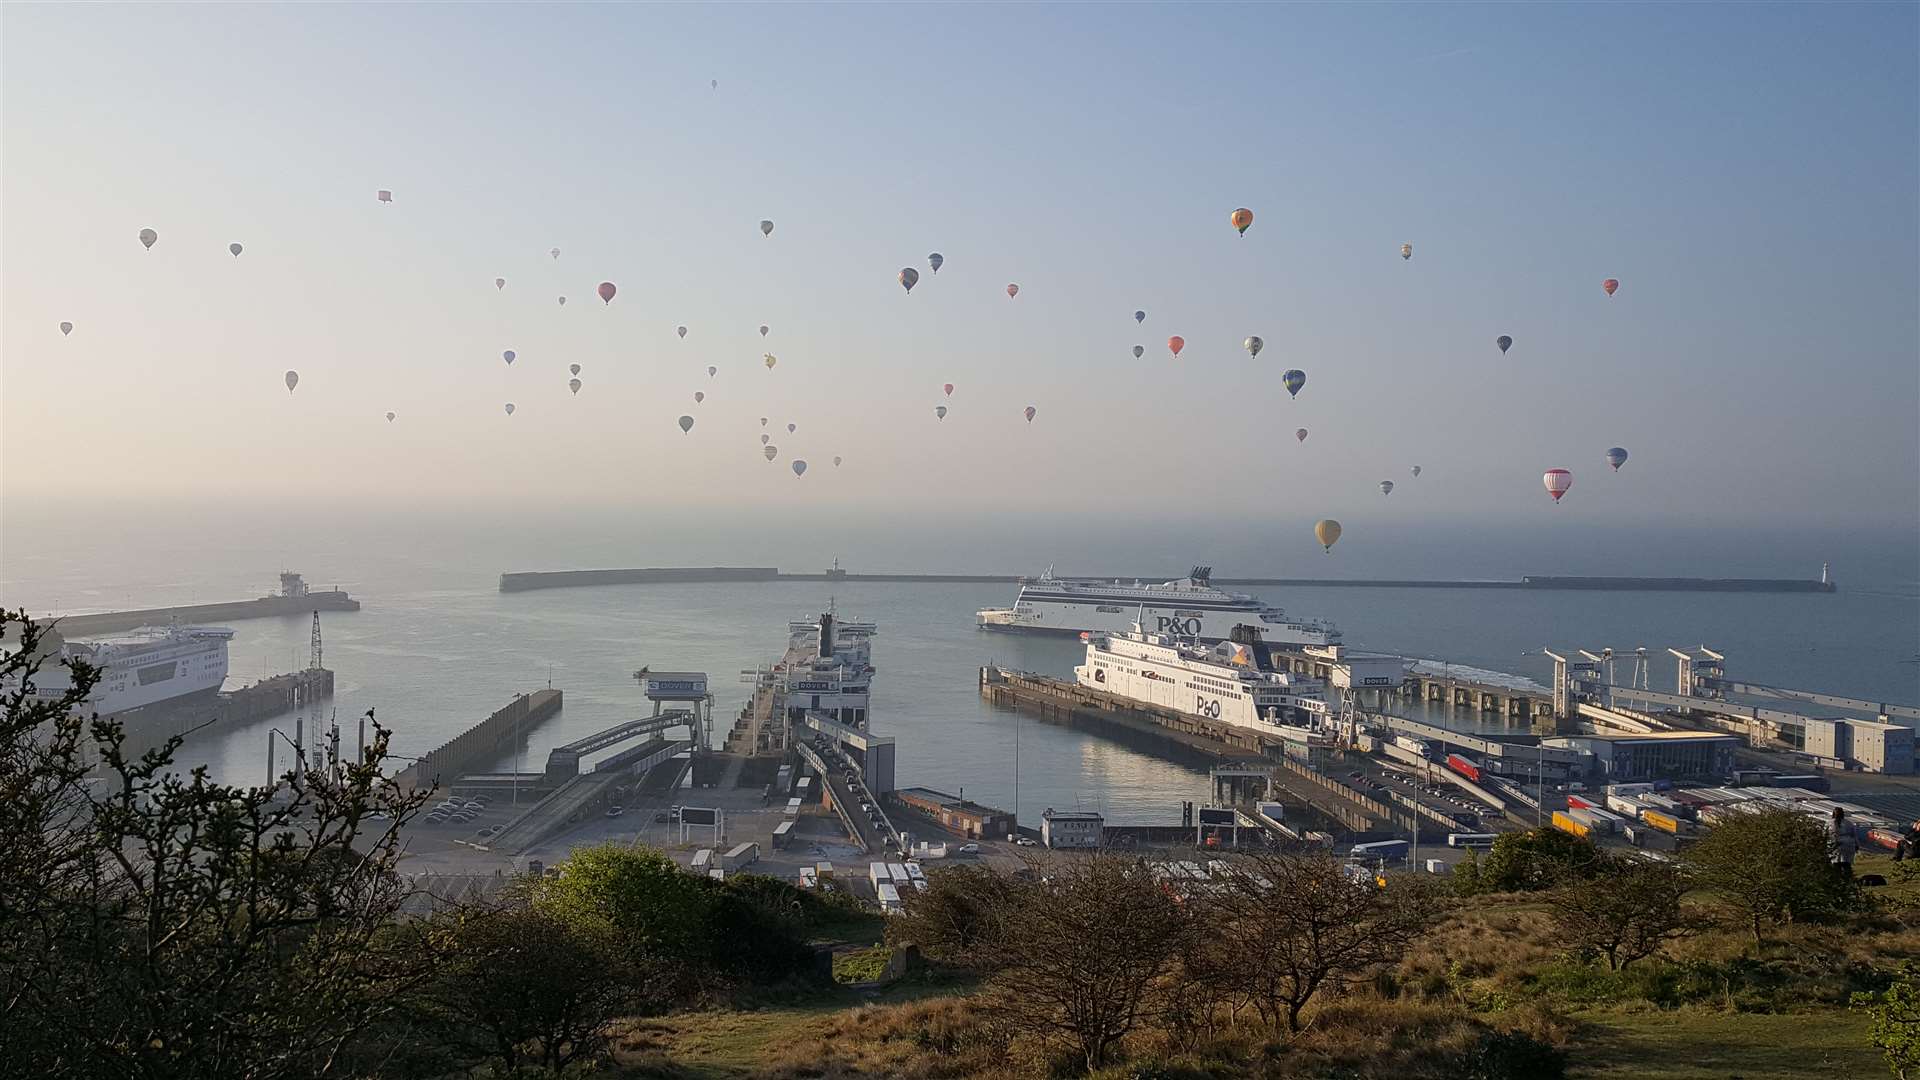 The hot air balloons over The Port of Dover. Picture: Janine Blower